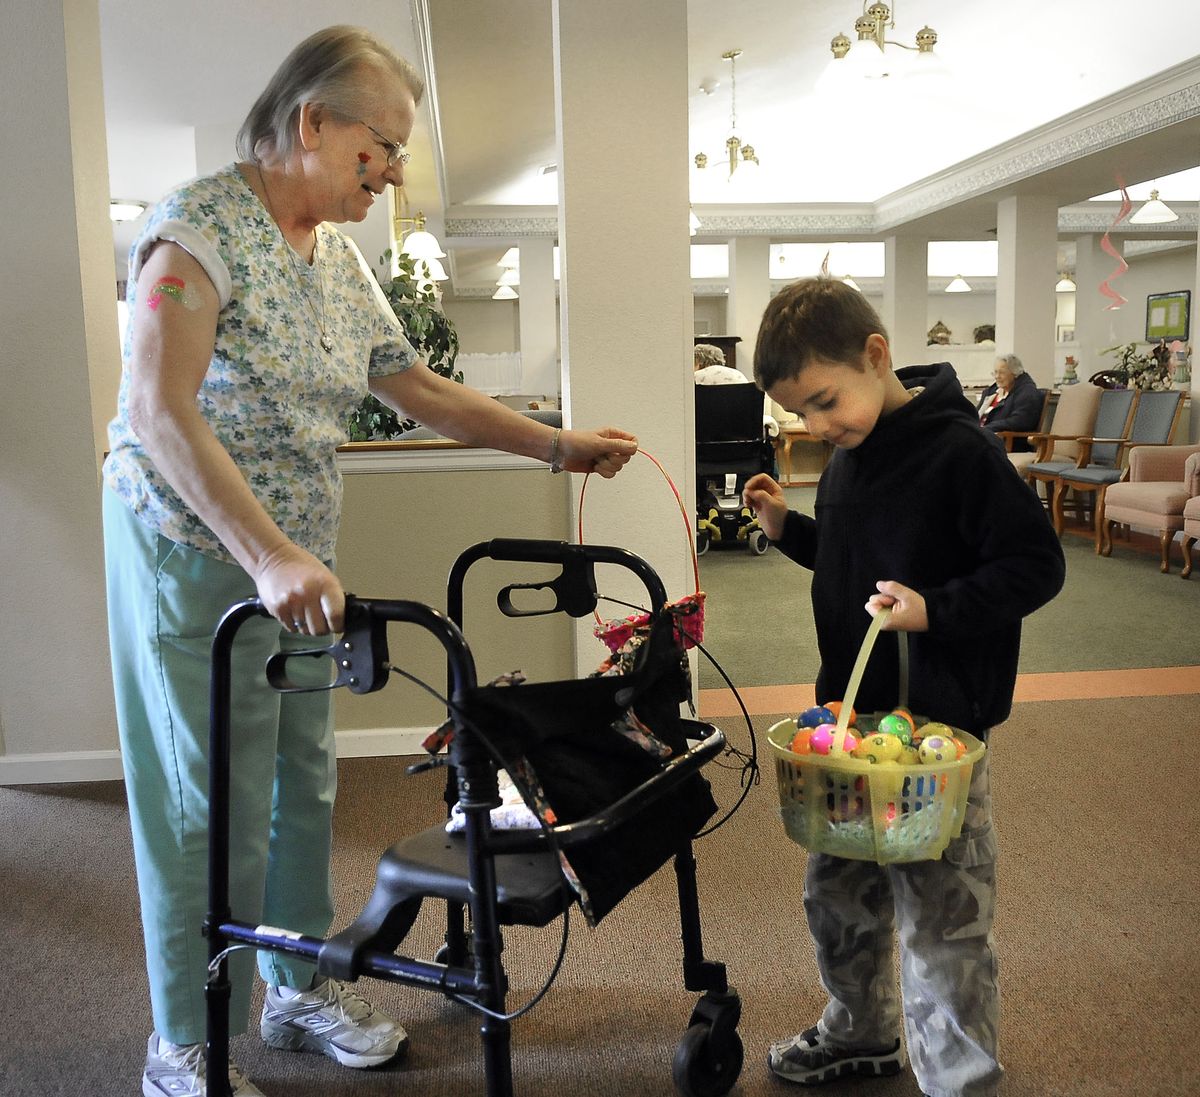 Sam Kiperash, 7, shares Easter eggs from his basket with Charlotte Carpenter, 59, on Saturday at the Windriver House in Spokane. Sam had already toured  the hallways and gathered the eggs before Carpenter started out with her empty basket.  (Photos by DAN PELLE / The Spokesman-Review)